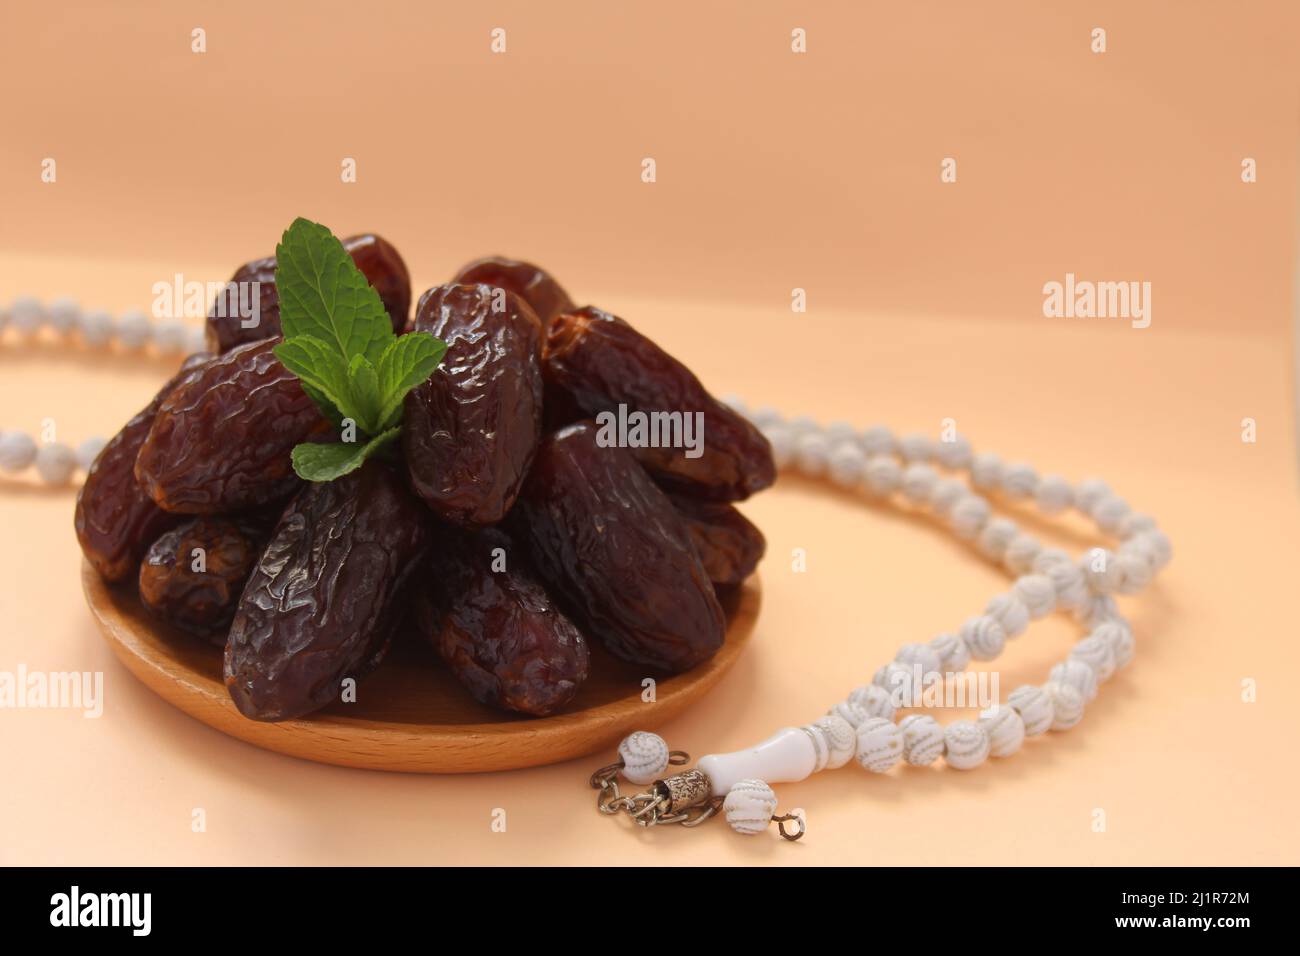 Fresh date fruits and white prayer beads, ramadhan concept idea. Sitting view. Vibrant color date fruit prepared for iftar. Stock Photo